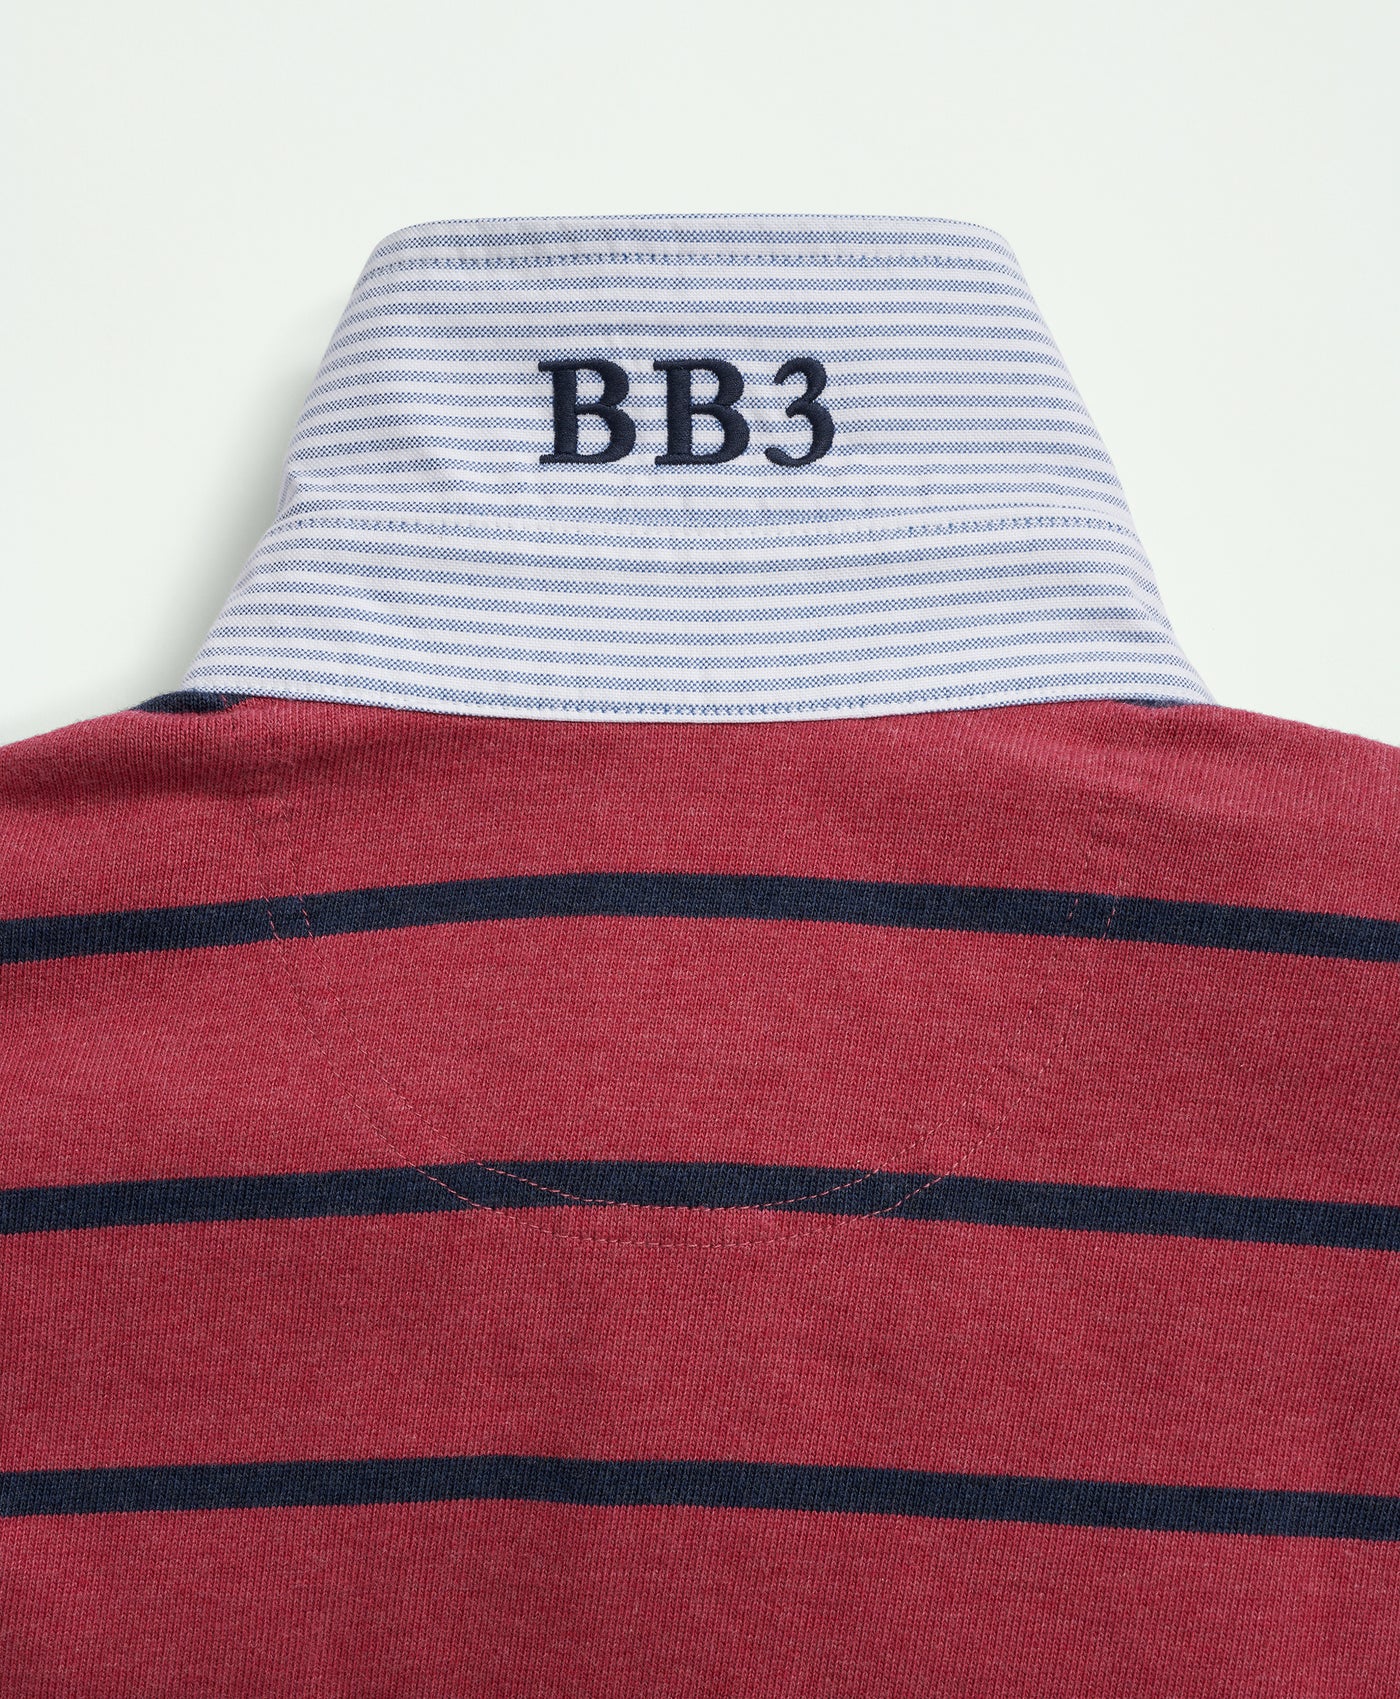 Cotton BB#3 Stripe Rugby Shirt - Brooks Brothers Canada